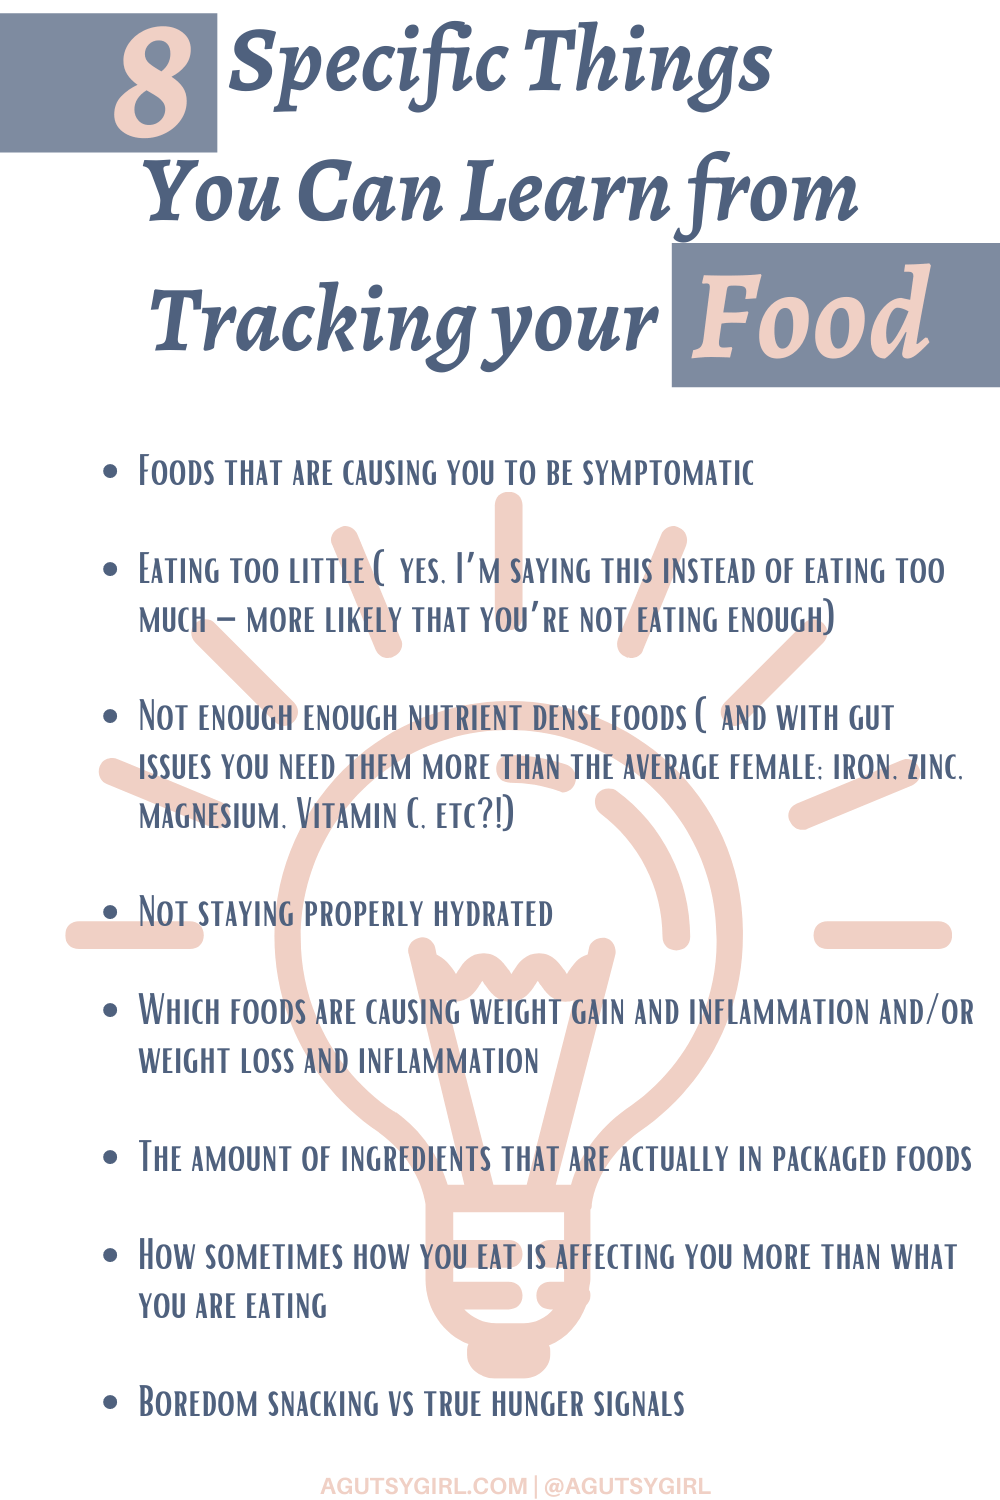 Food Tracking 8 things you can learn agutsygirl.com #foodtracker #foodtracking #fooddiary #foodjournal